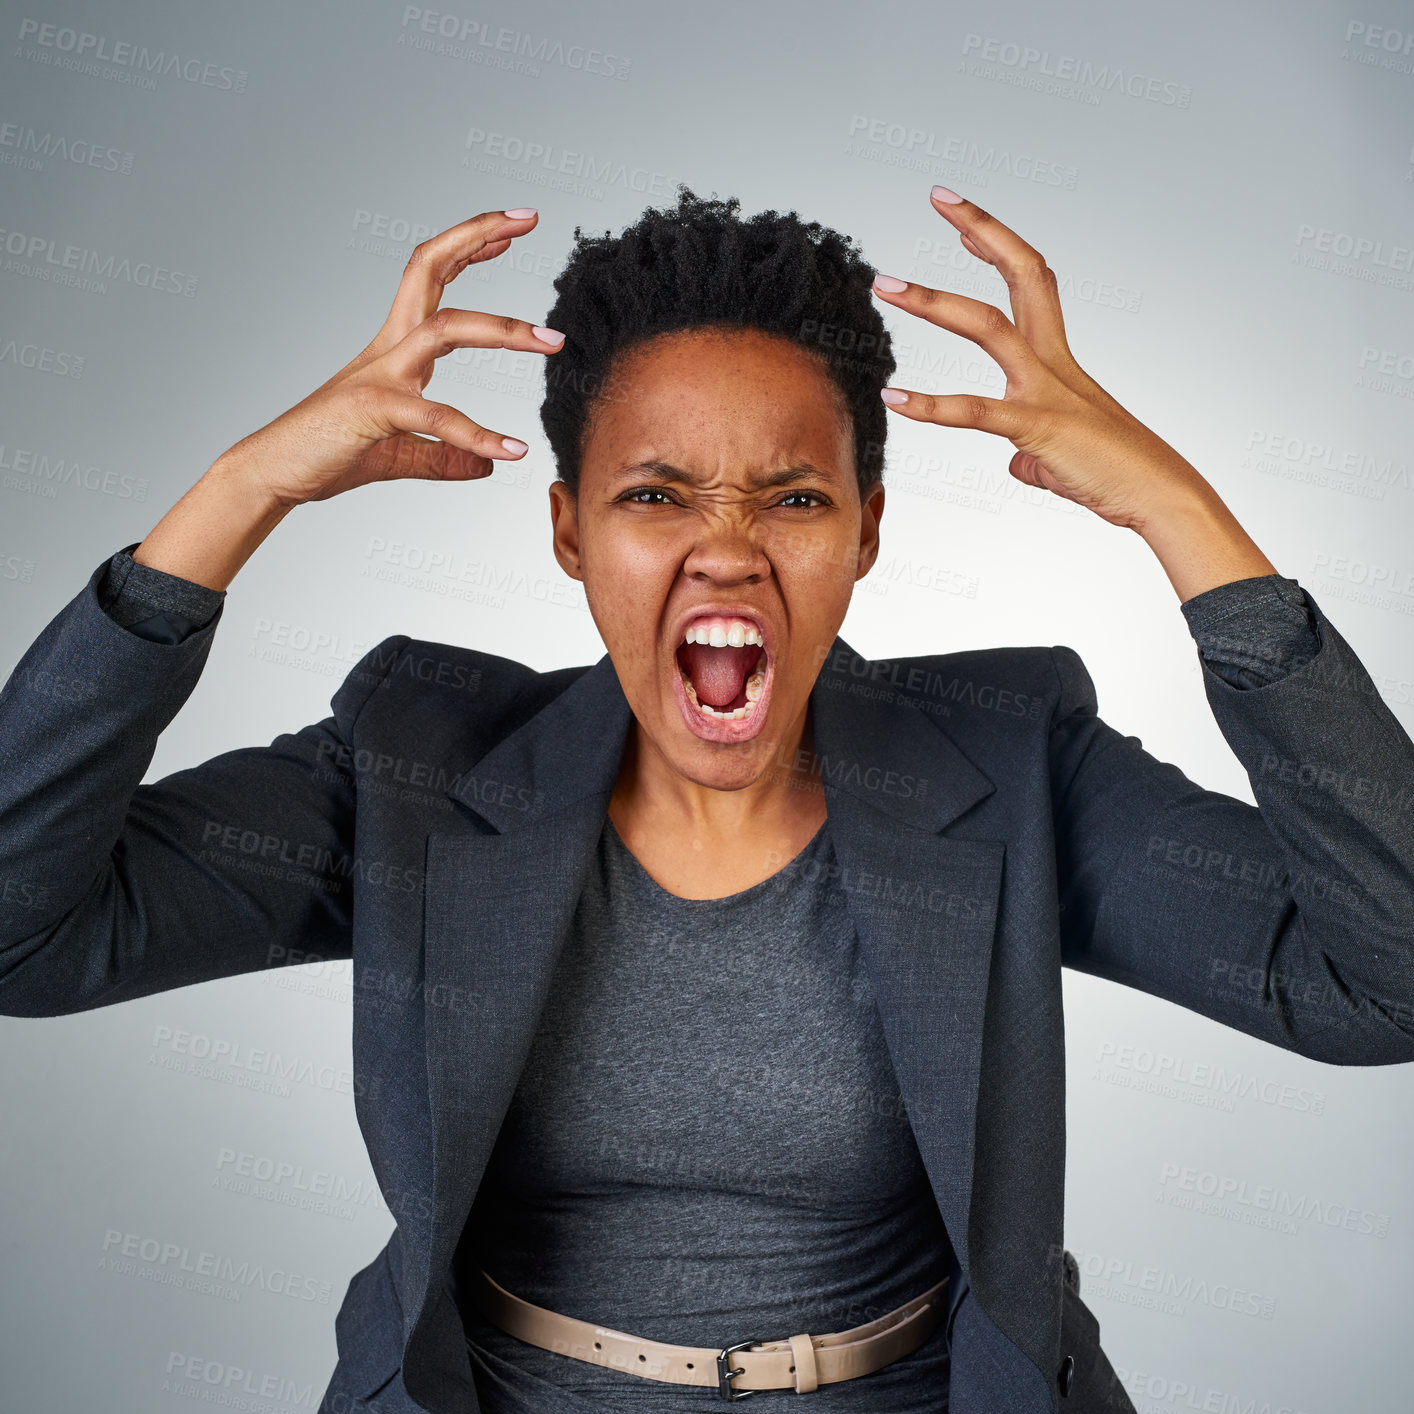 Buy stock photo Portrait of an angry businesswoman yelling against a grey background